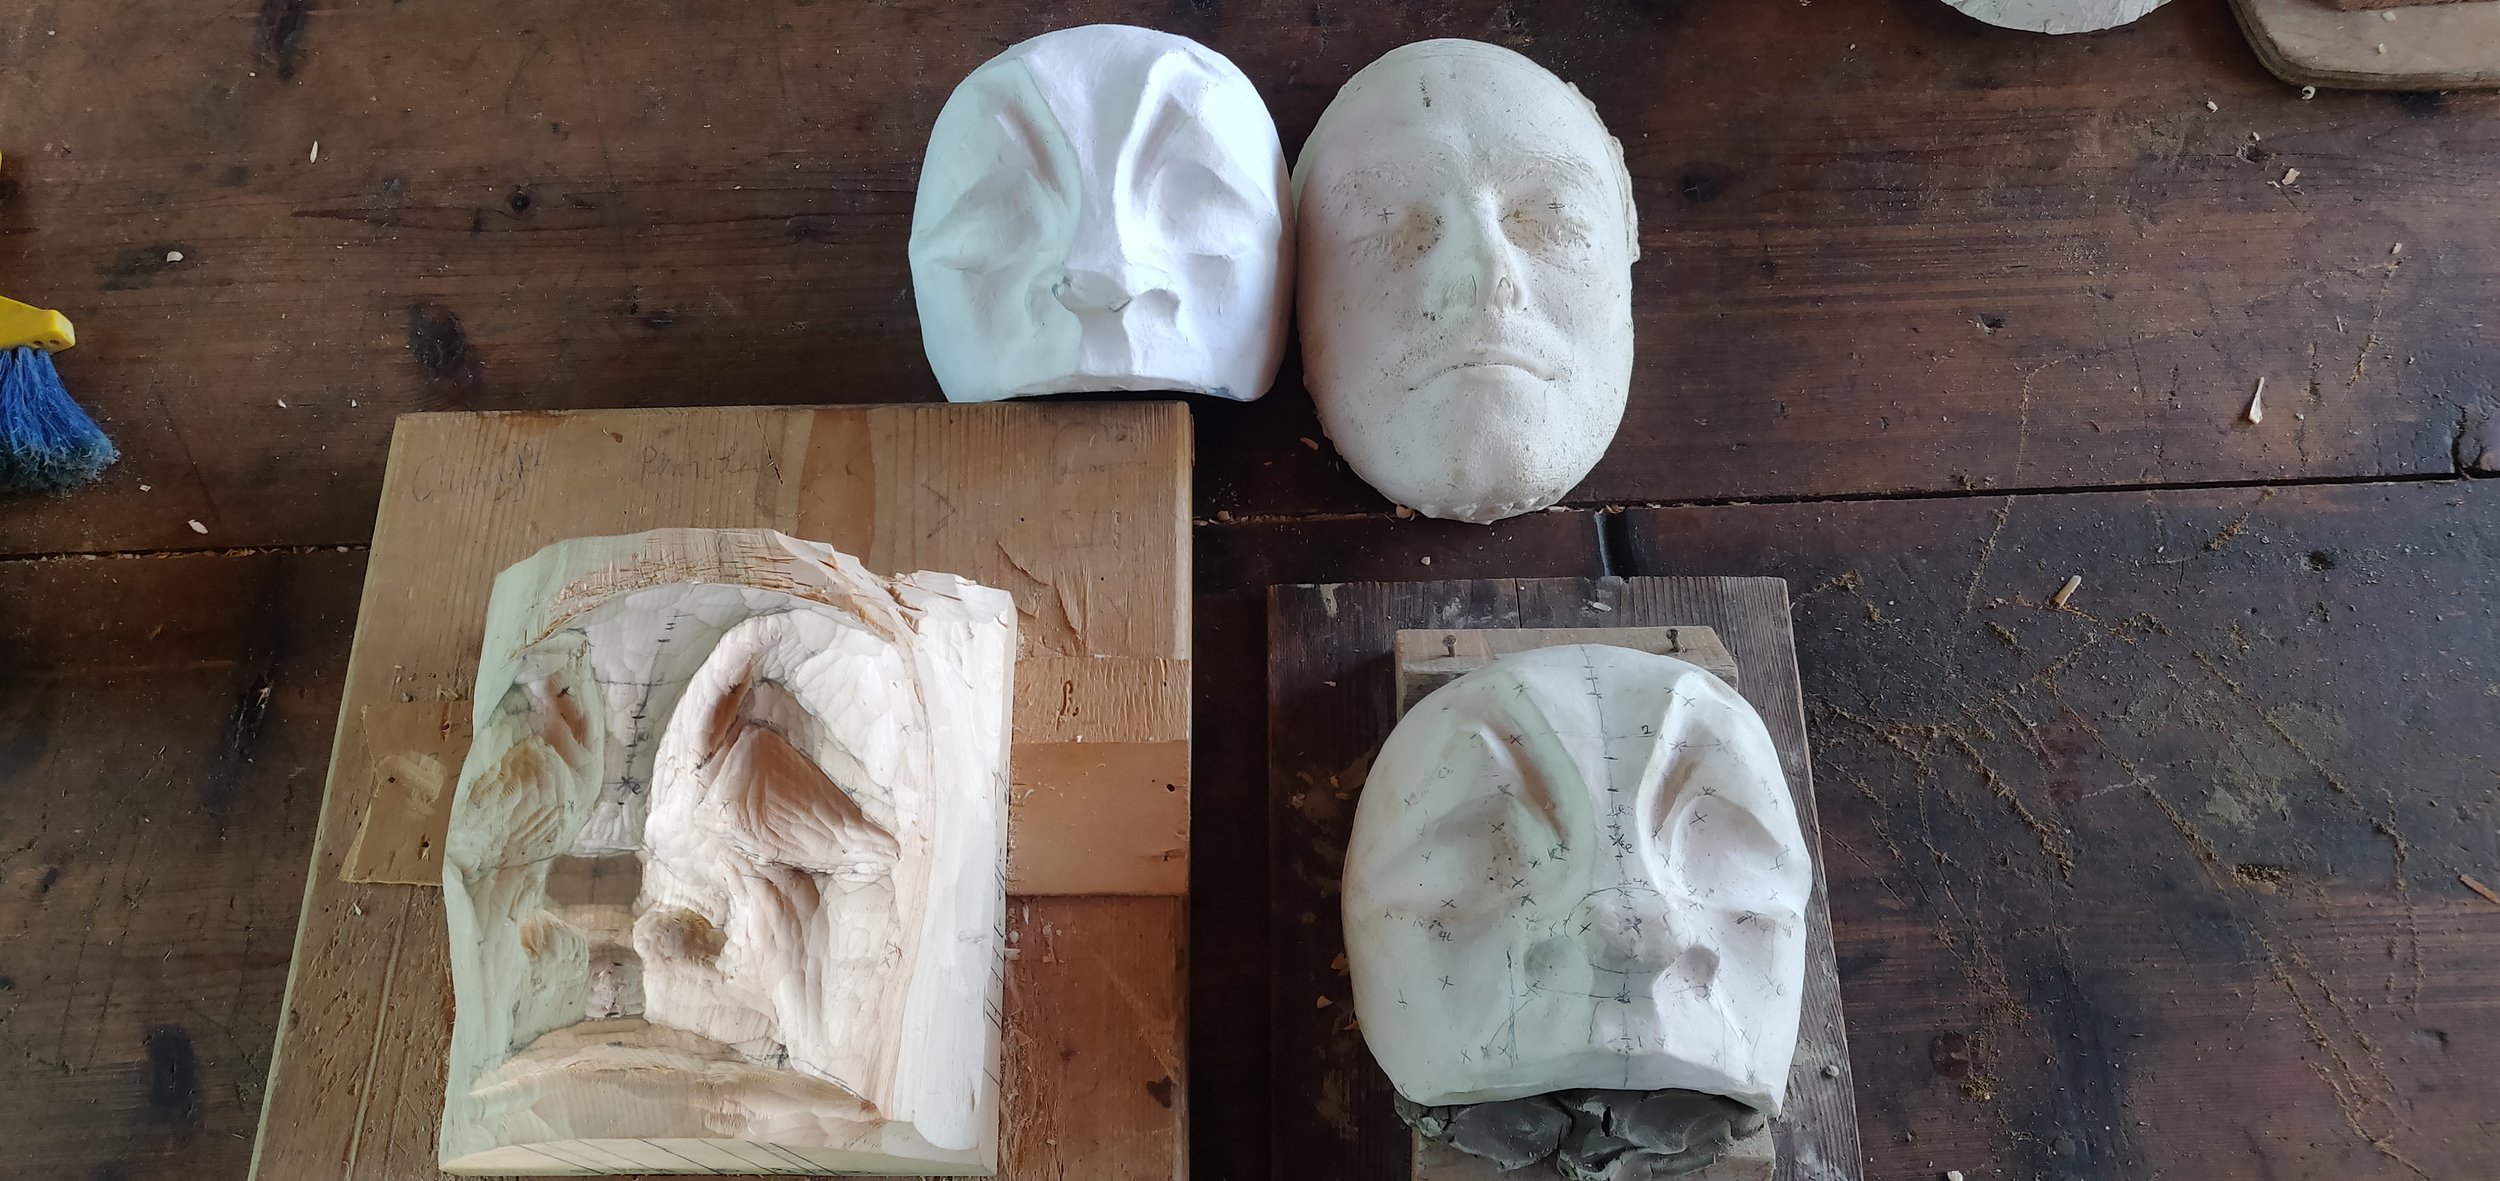 Wood carving in progress with plaster positive and papier mache mask